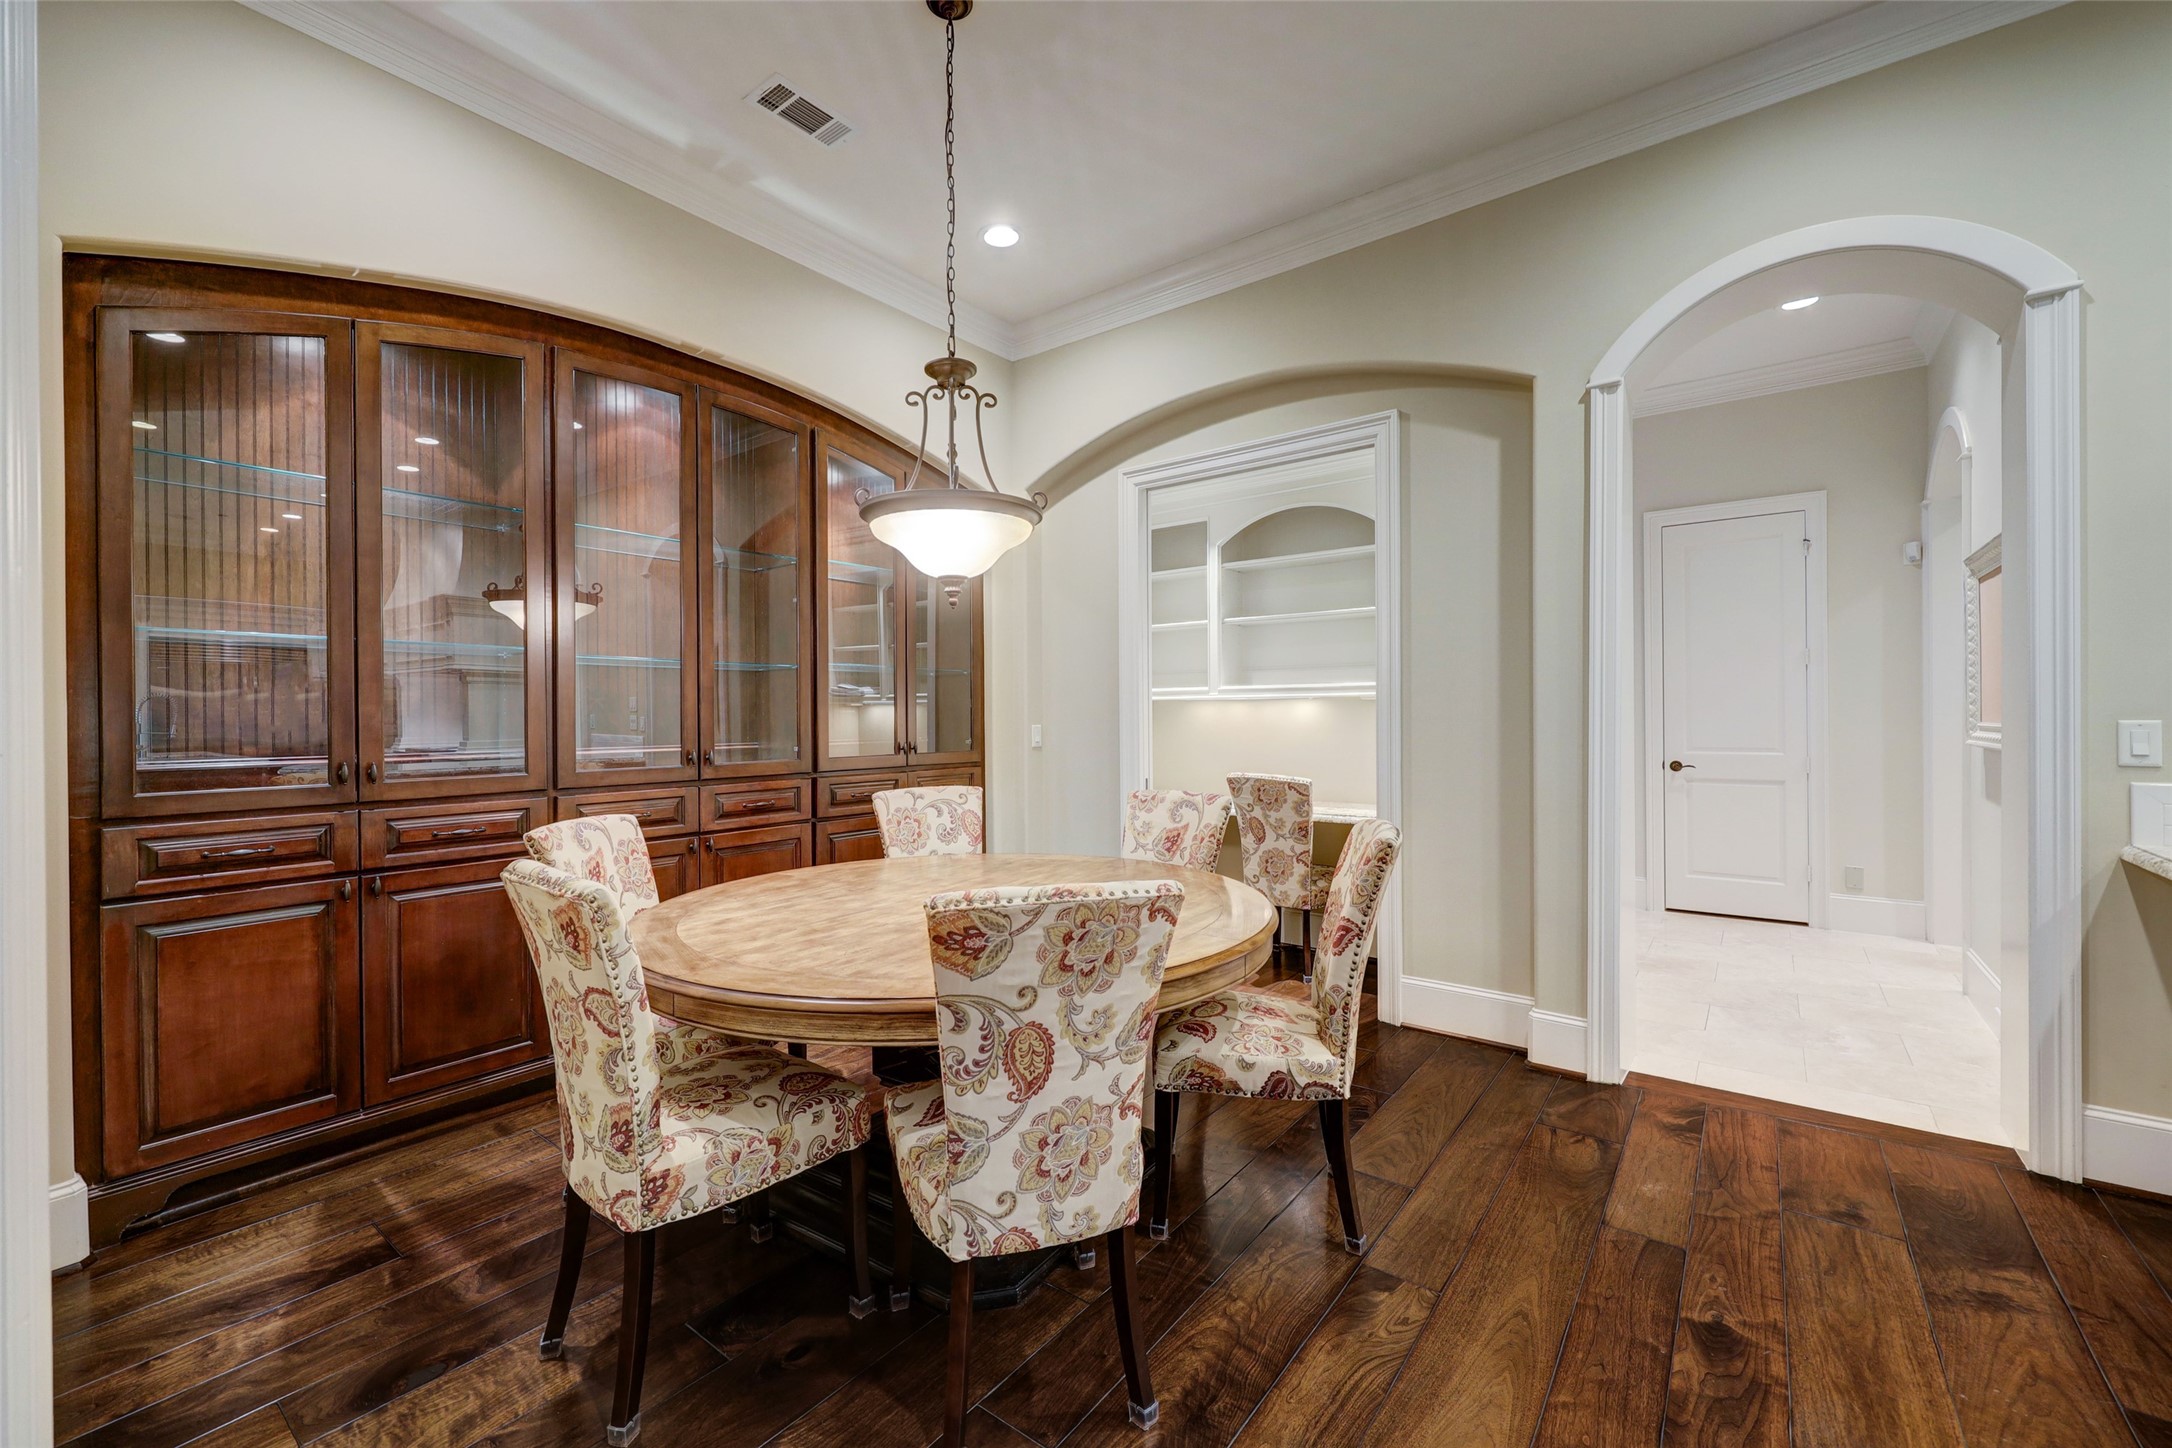 Aside the Kitchen is an eat-in Breakfast Room featuring a large built-in Breakfront, plus a Command Center that disappears behind nifty pocket doors.  To the right of frame is...